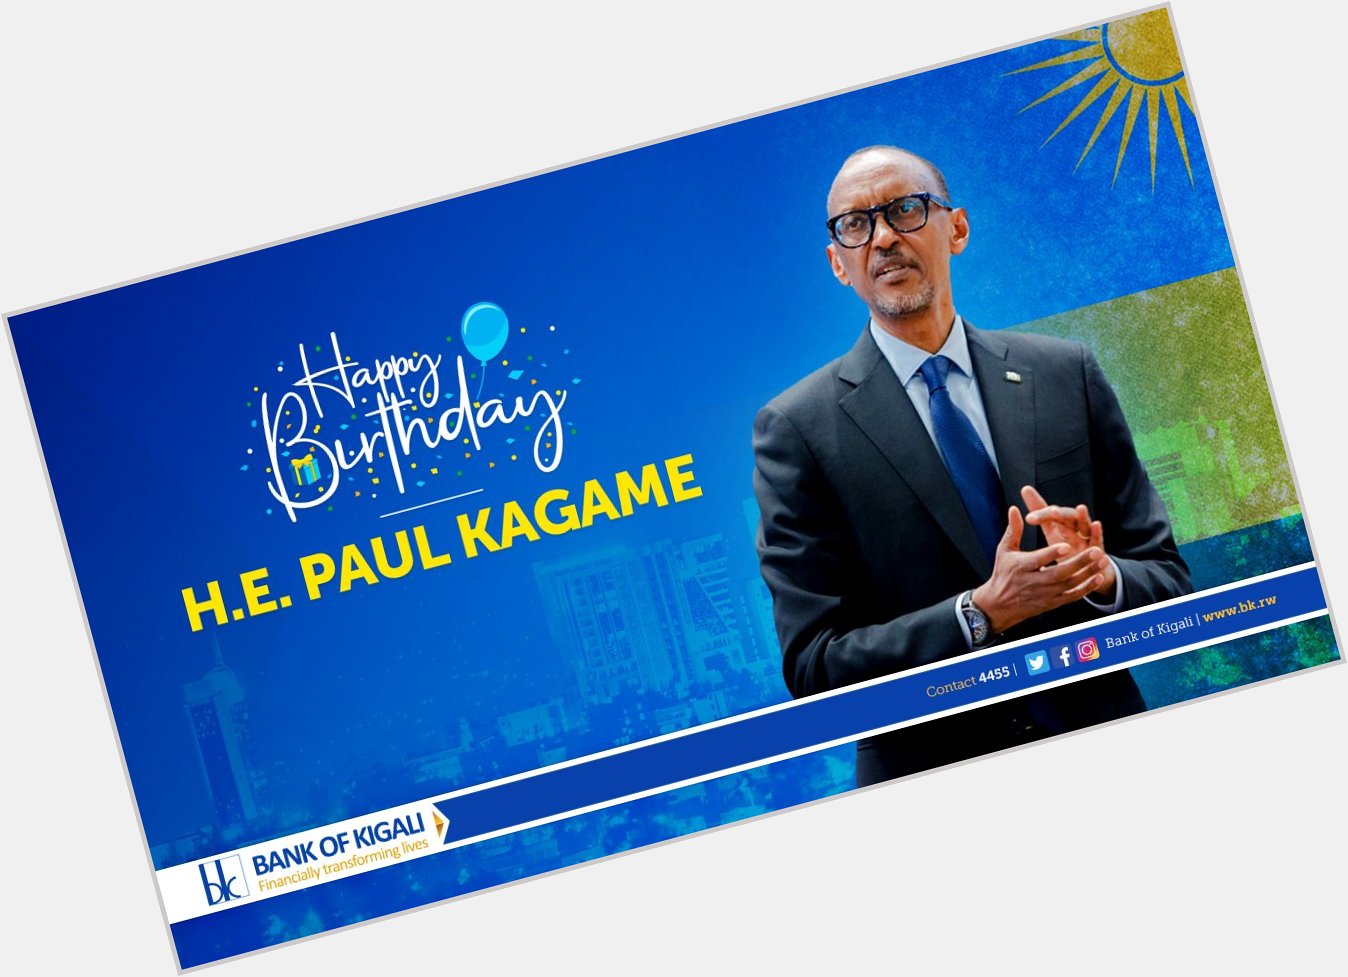 You are a great role model and example for this generation. Happy birthday H.E Paul Kagame 